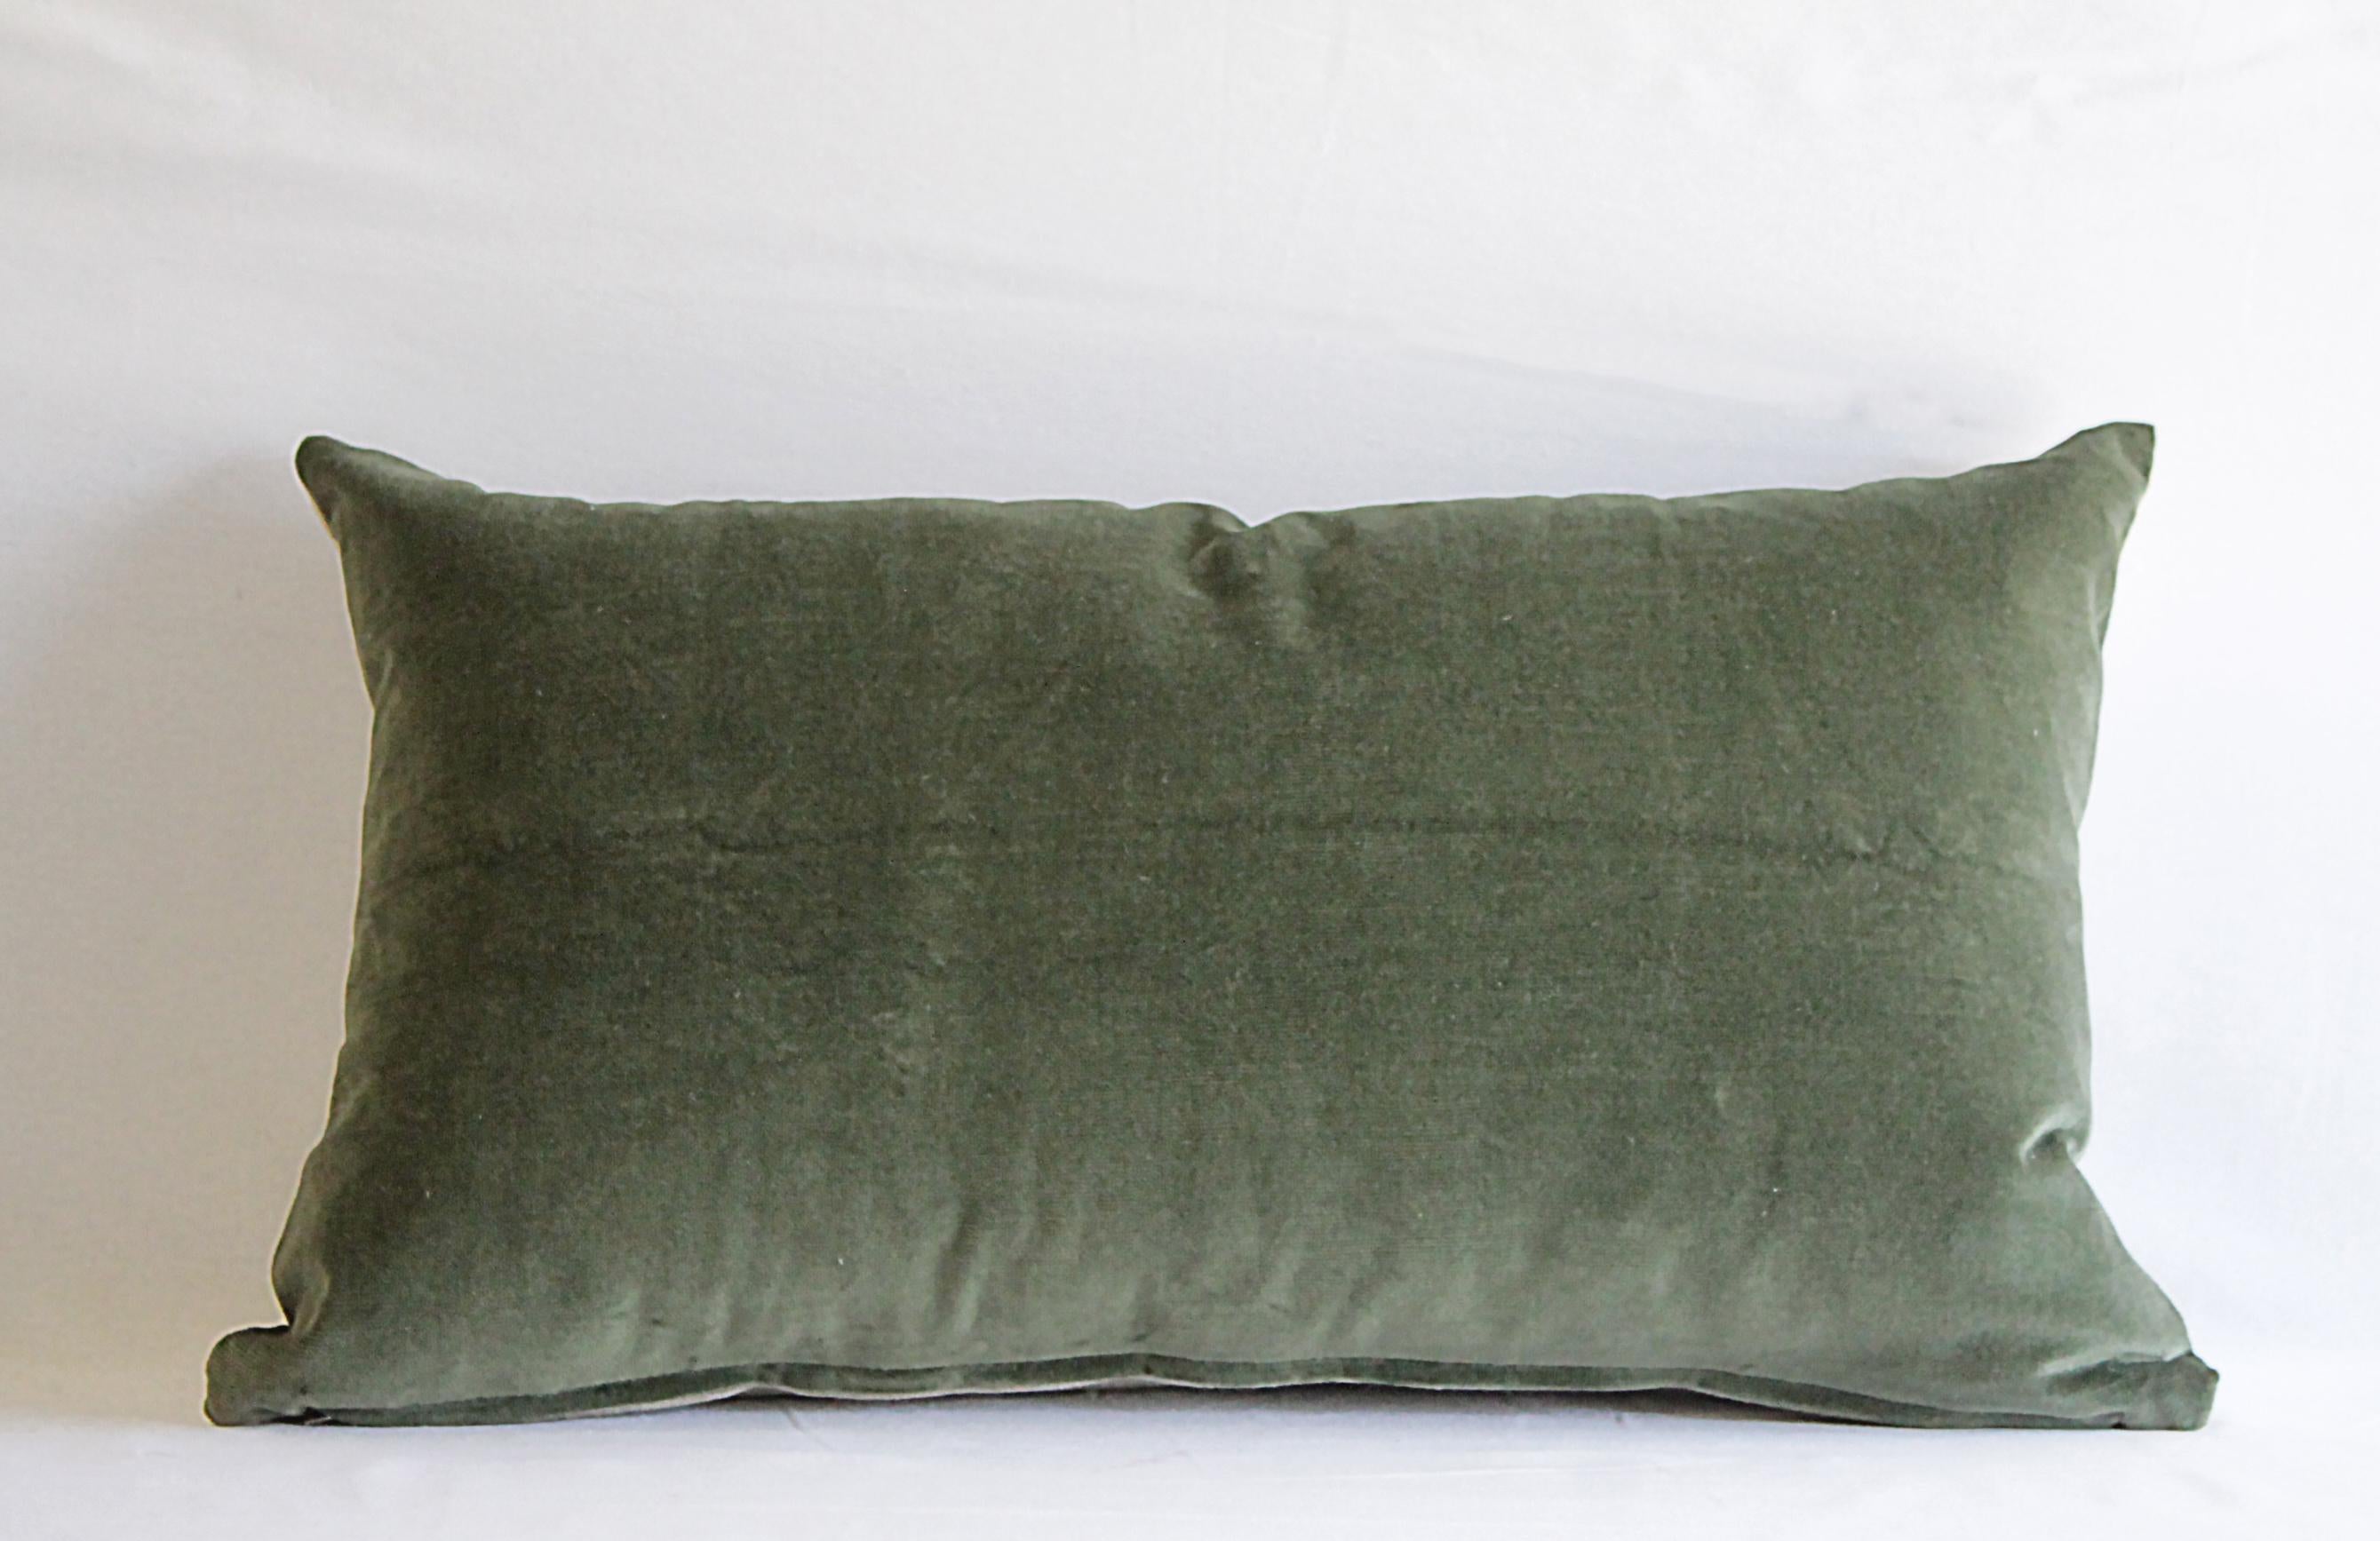 Custom made moss green cotton velvet and linen decorative pillows the front side is a new luxurious moss green cotton velvet, and the reverse is a natural Belgian Flax linen in a natural color. There is a hidden zipper closure, can be machine